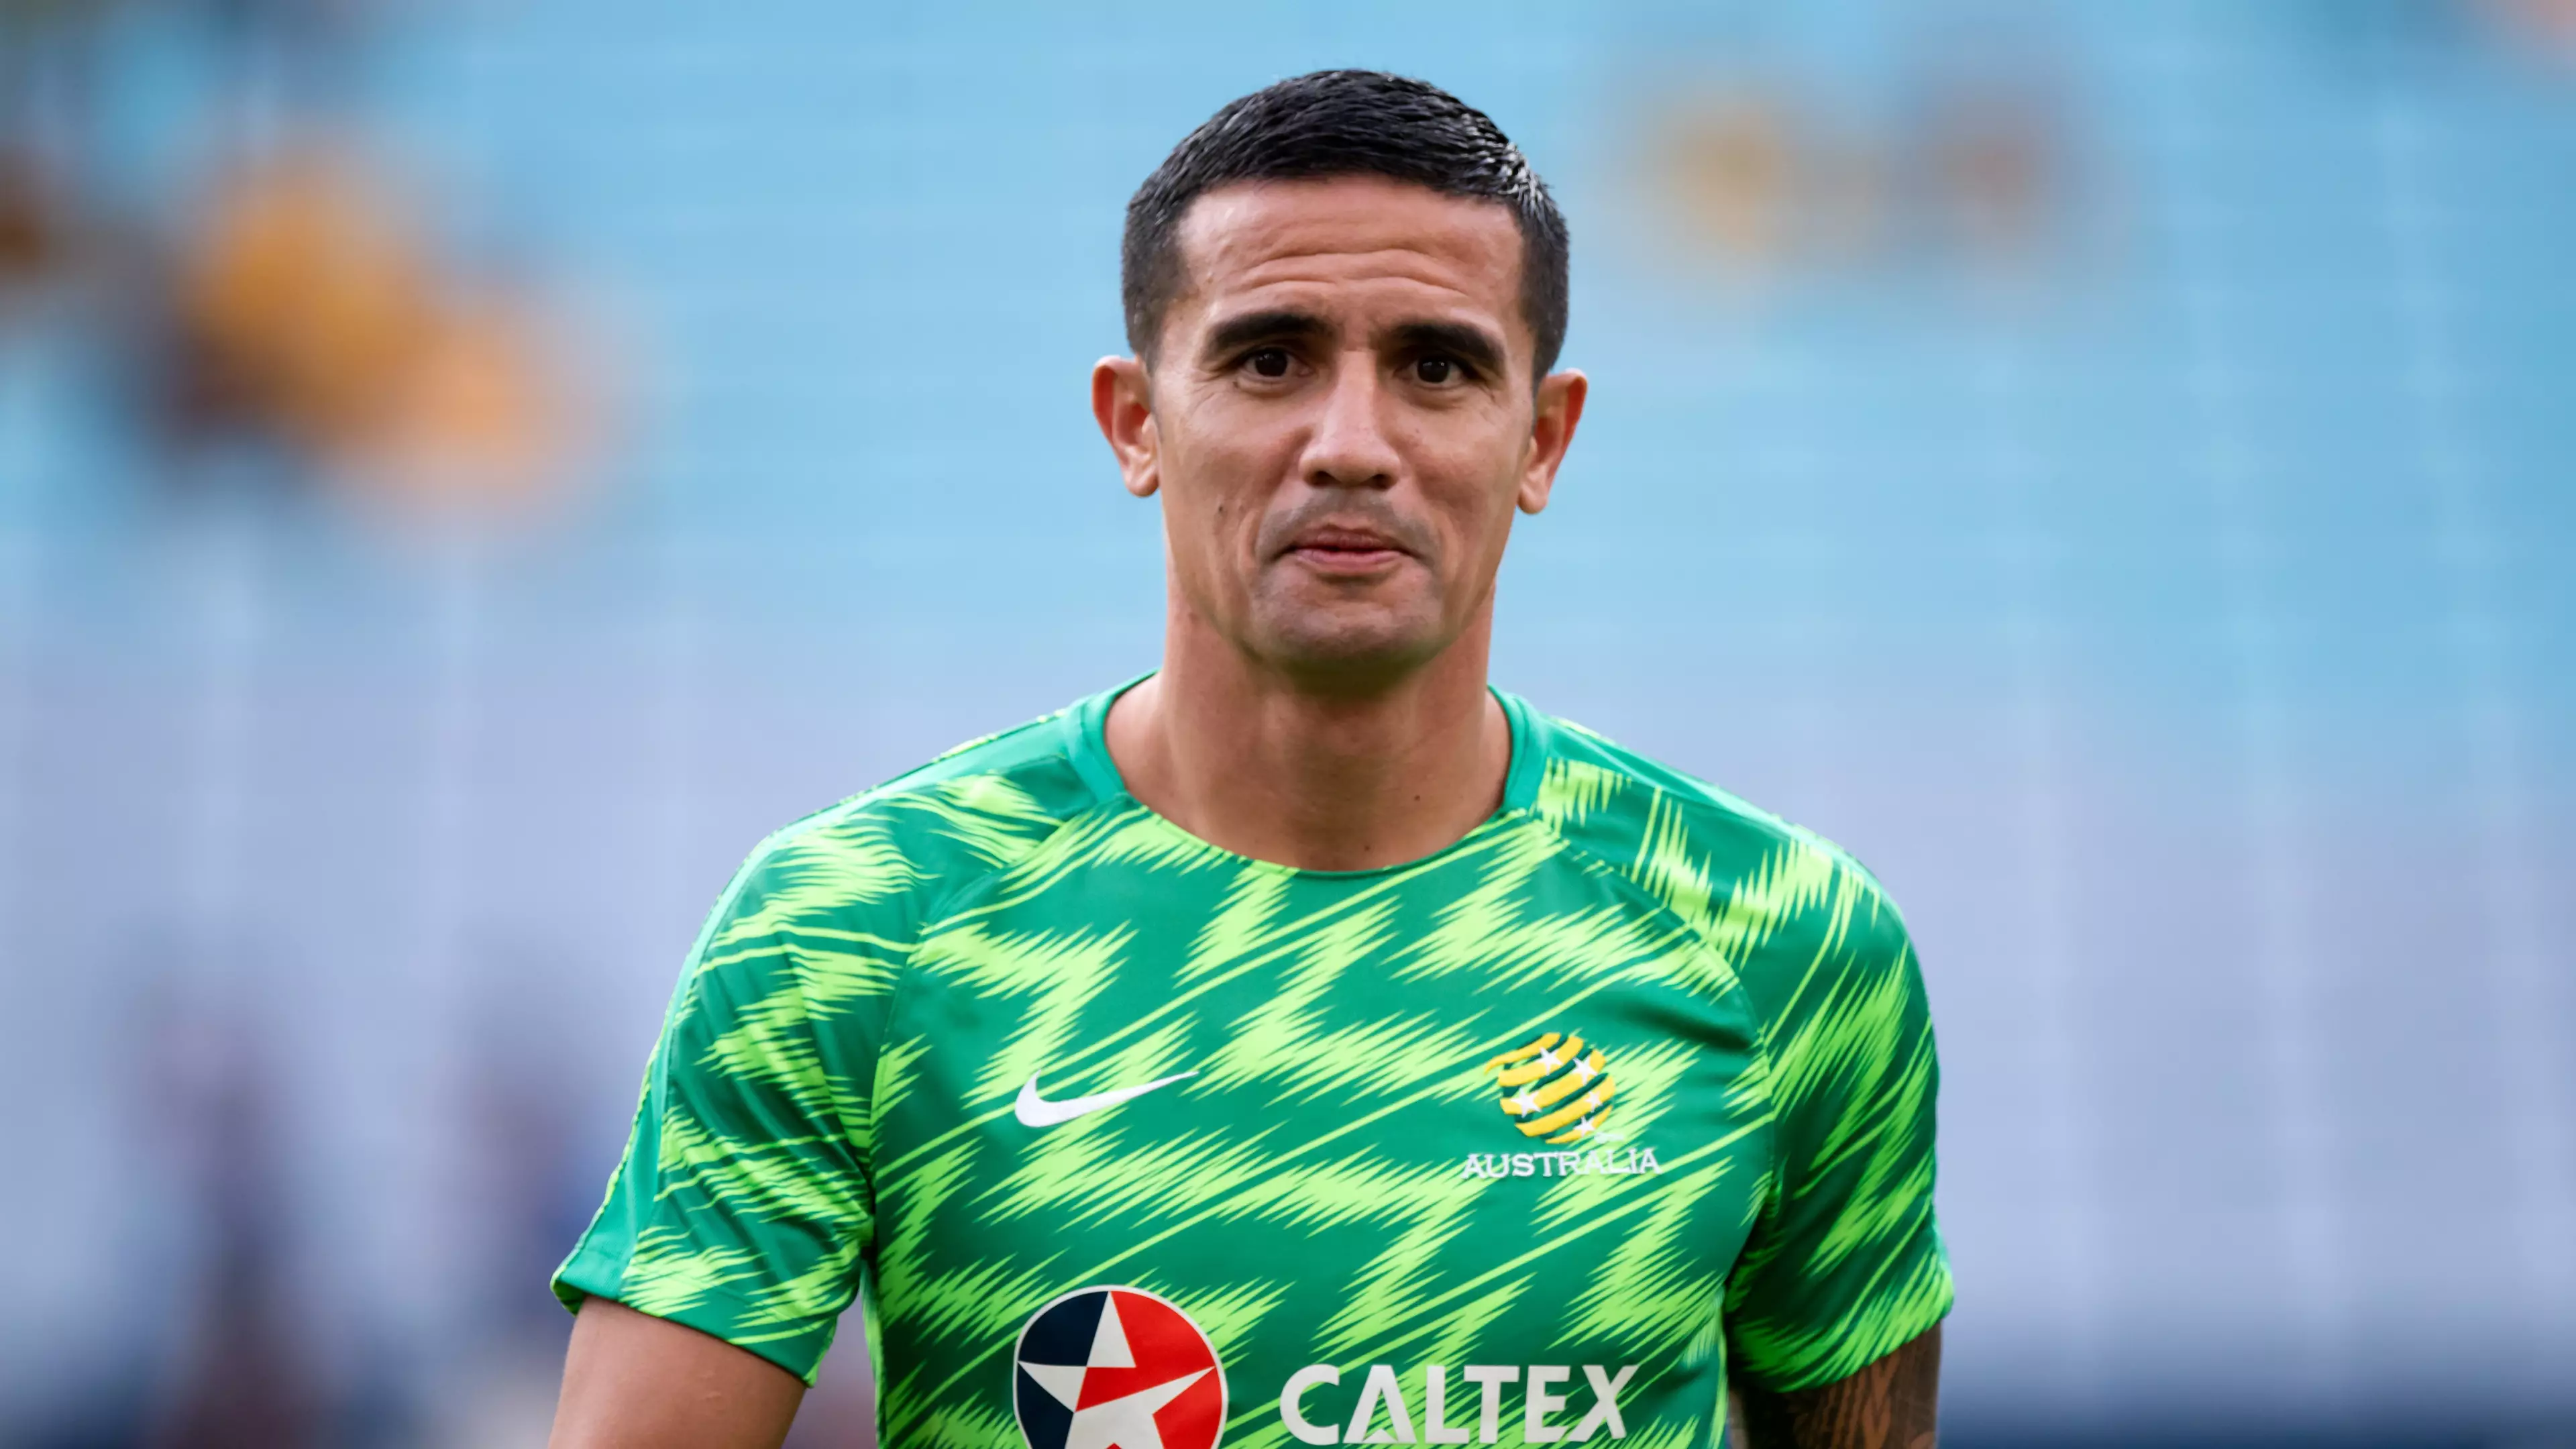 Aussie Legend Tim Cahill Has Officially Retired From Professional Soccer